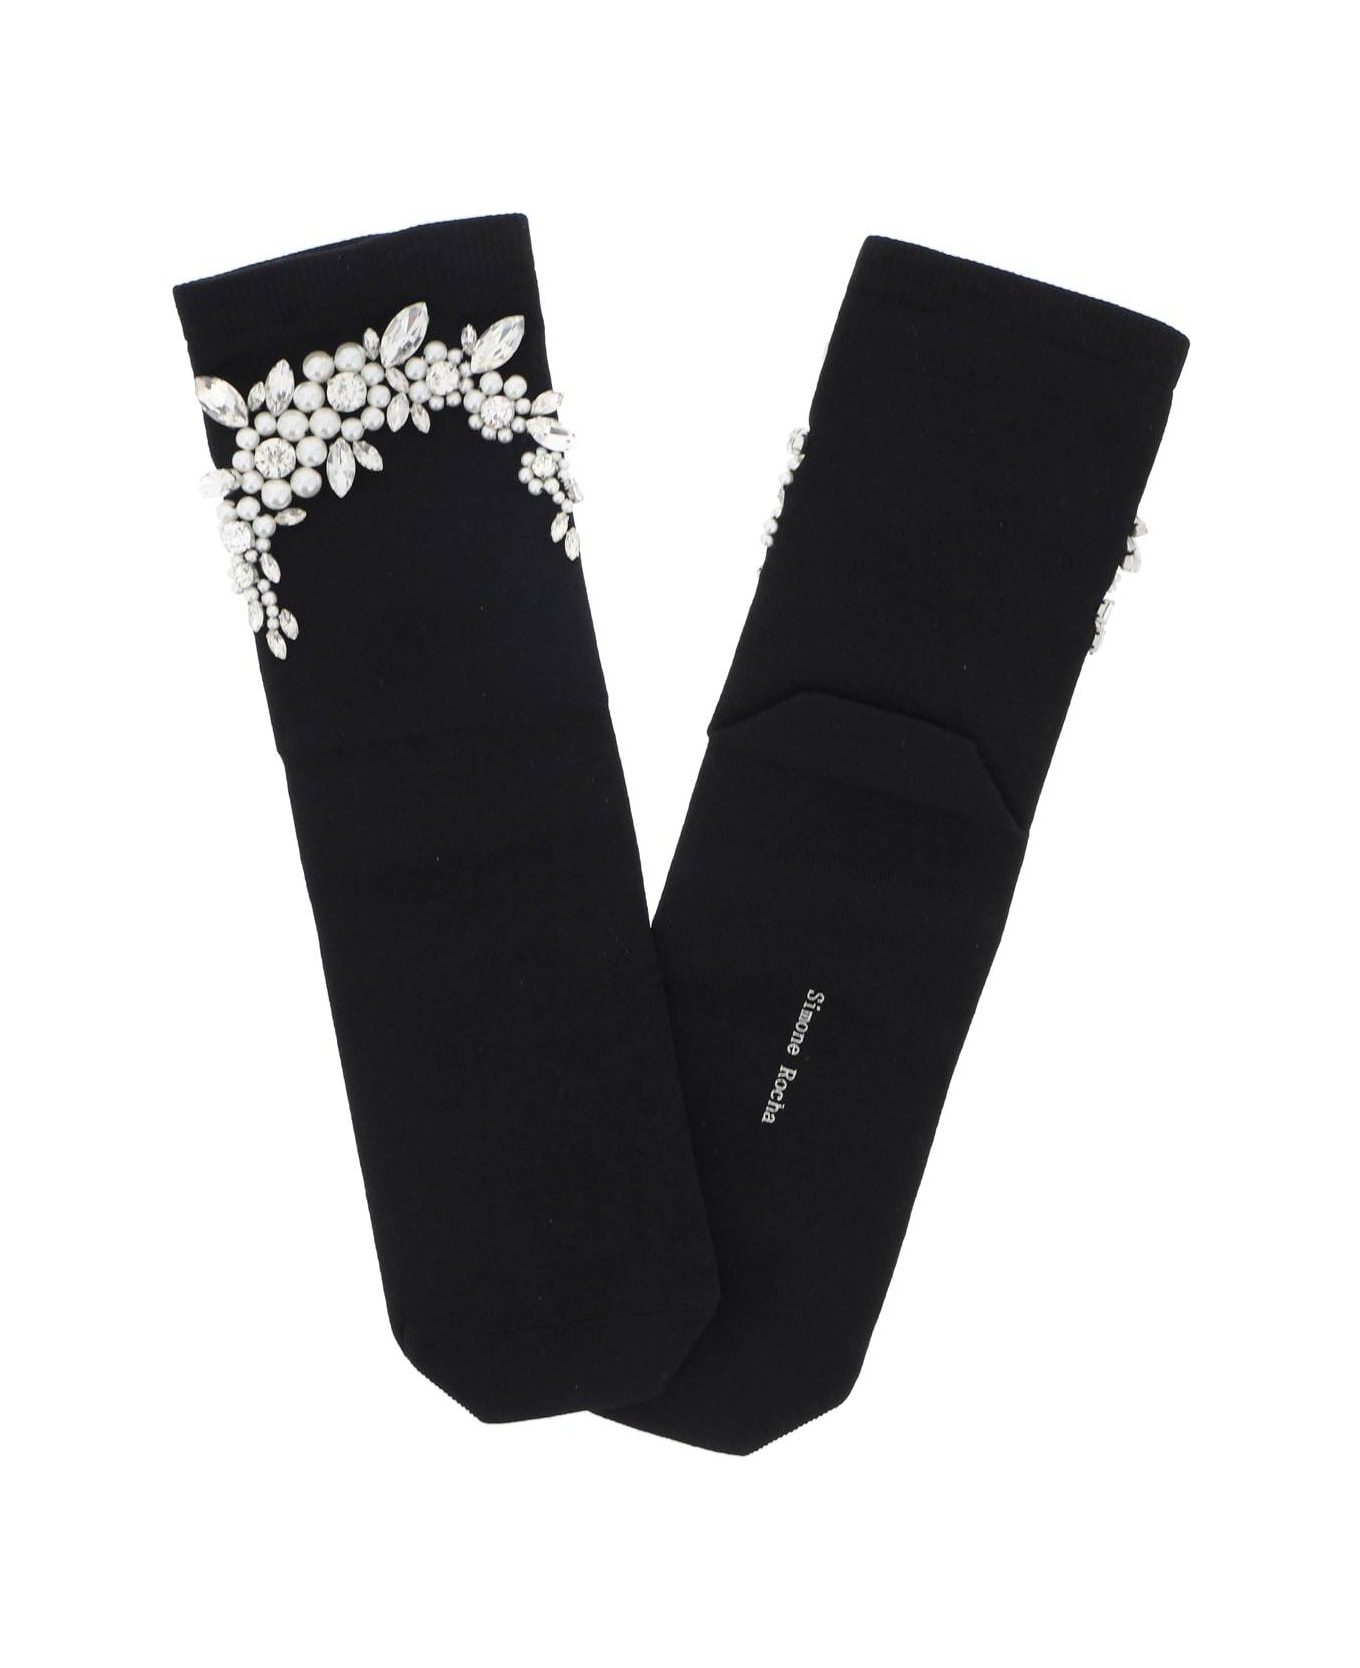 Simone Rocha Socks With Pearls And Crystals - BLACK PEARL CLEAR (Black)